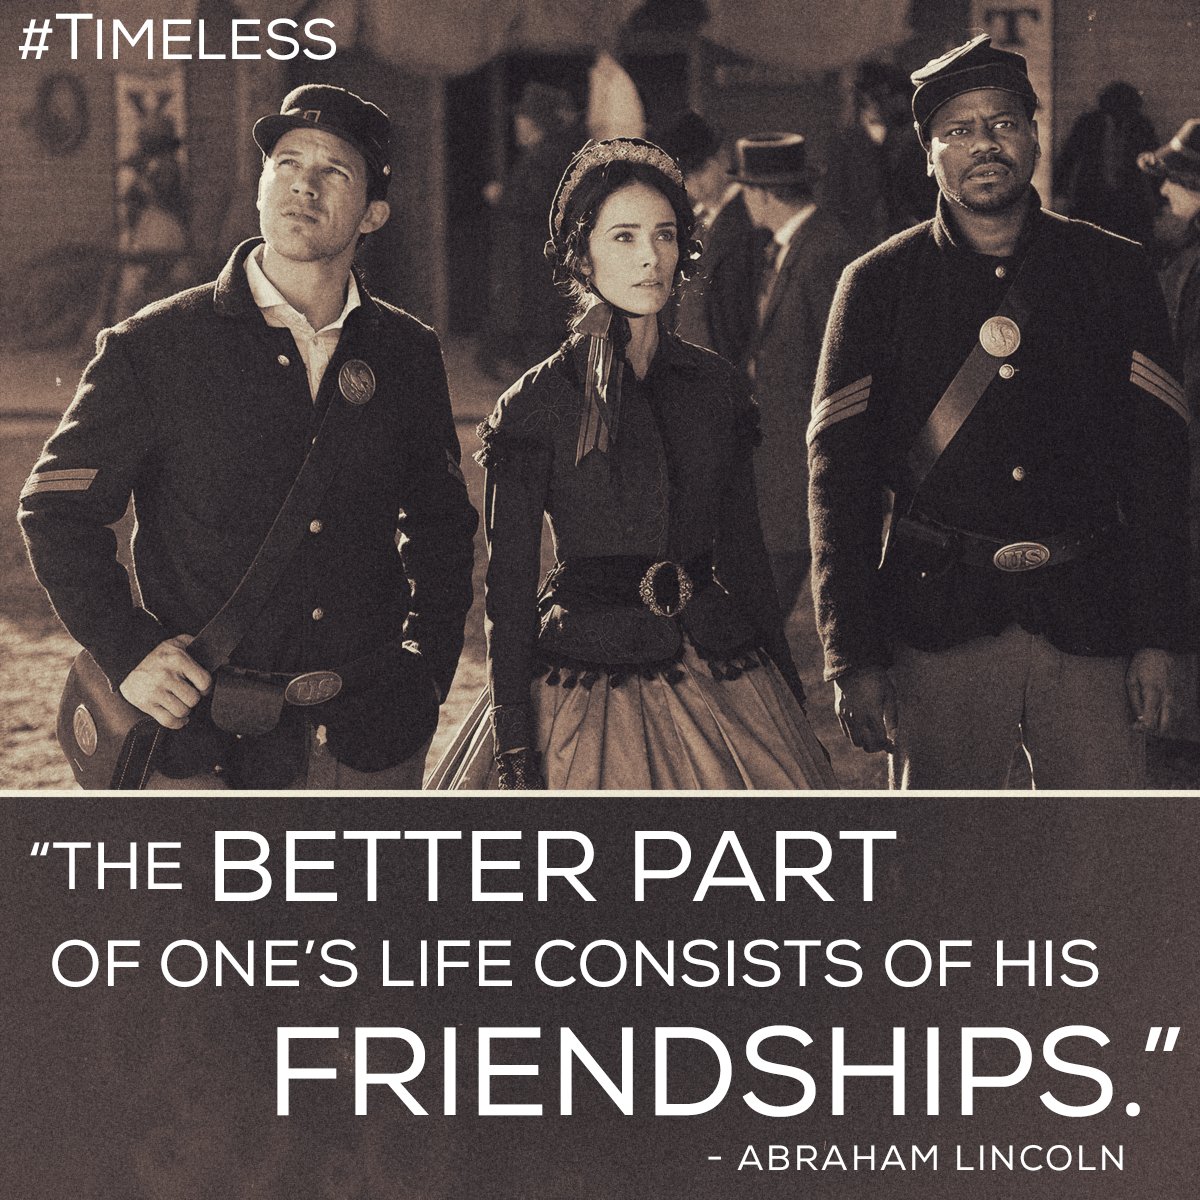 RT @NBCTimeless: .@AmHistoryMuseum will be screening #Timeless at the #HistoryFilmForm event tonight at 7:30p ET. https://t.co/25ECUdhPOY